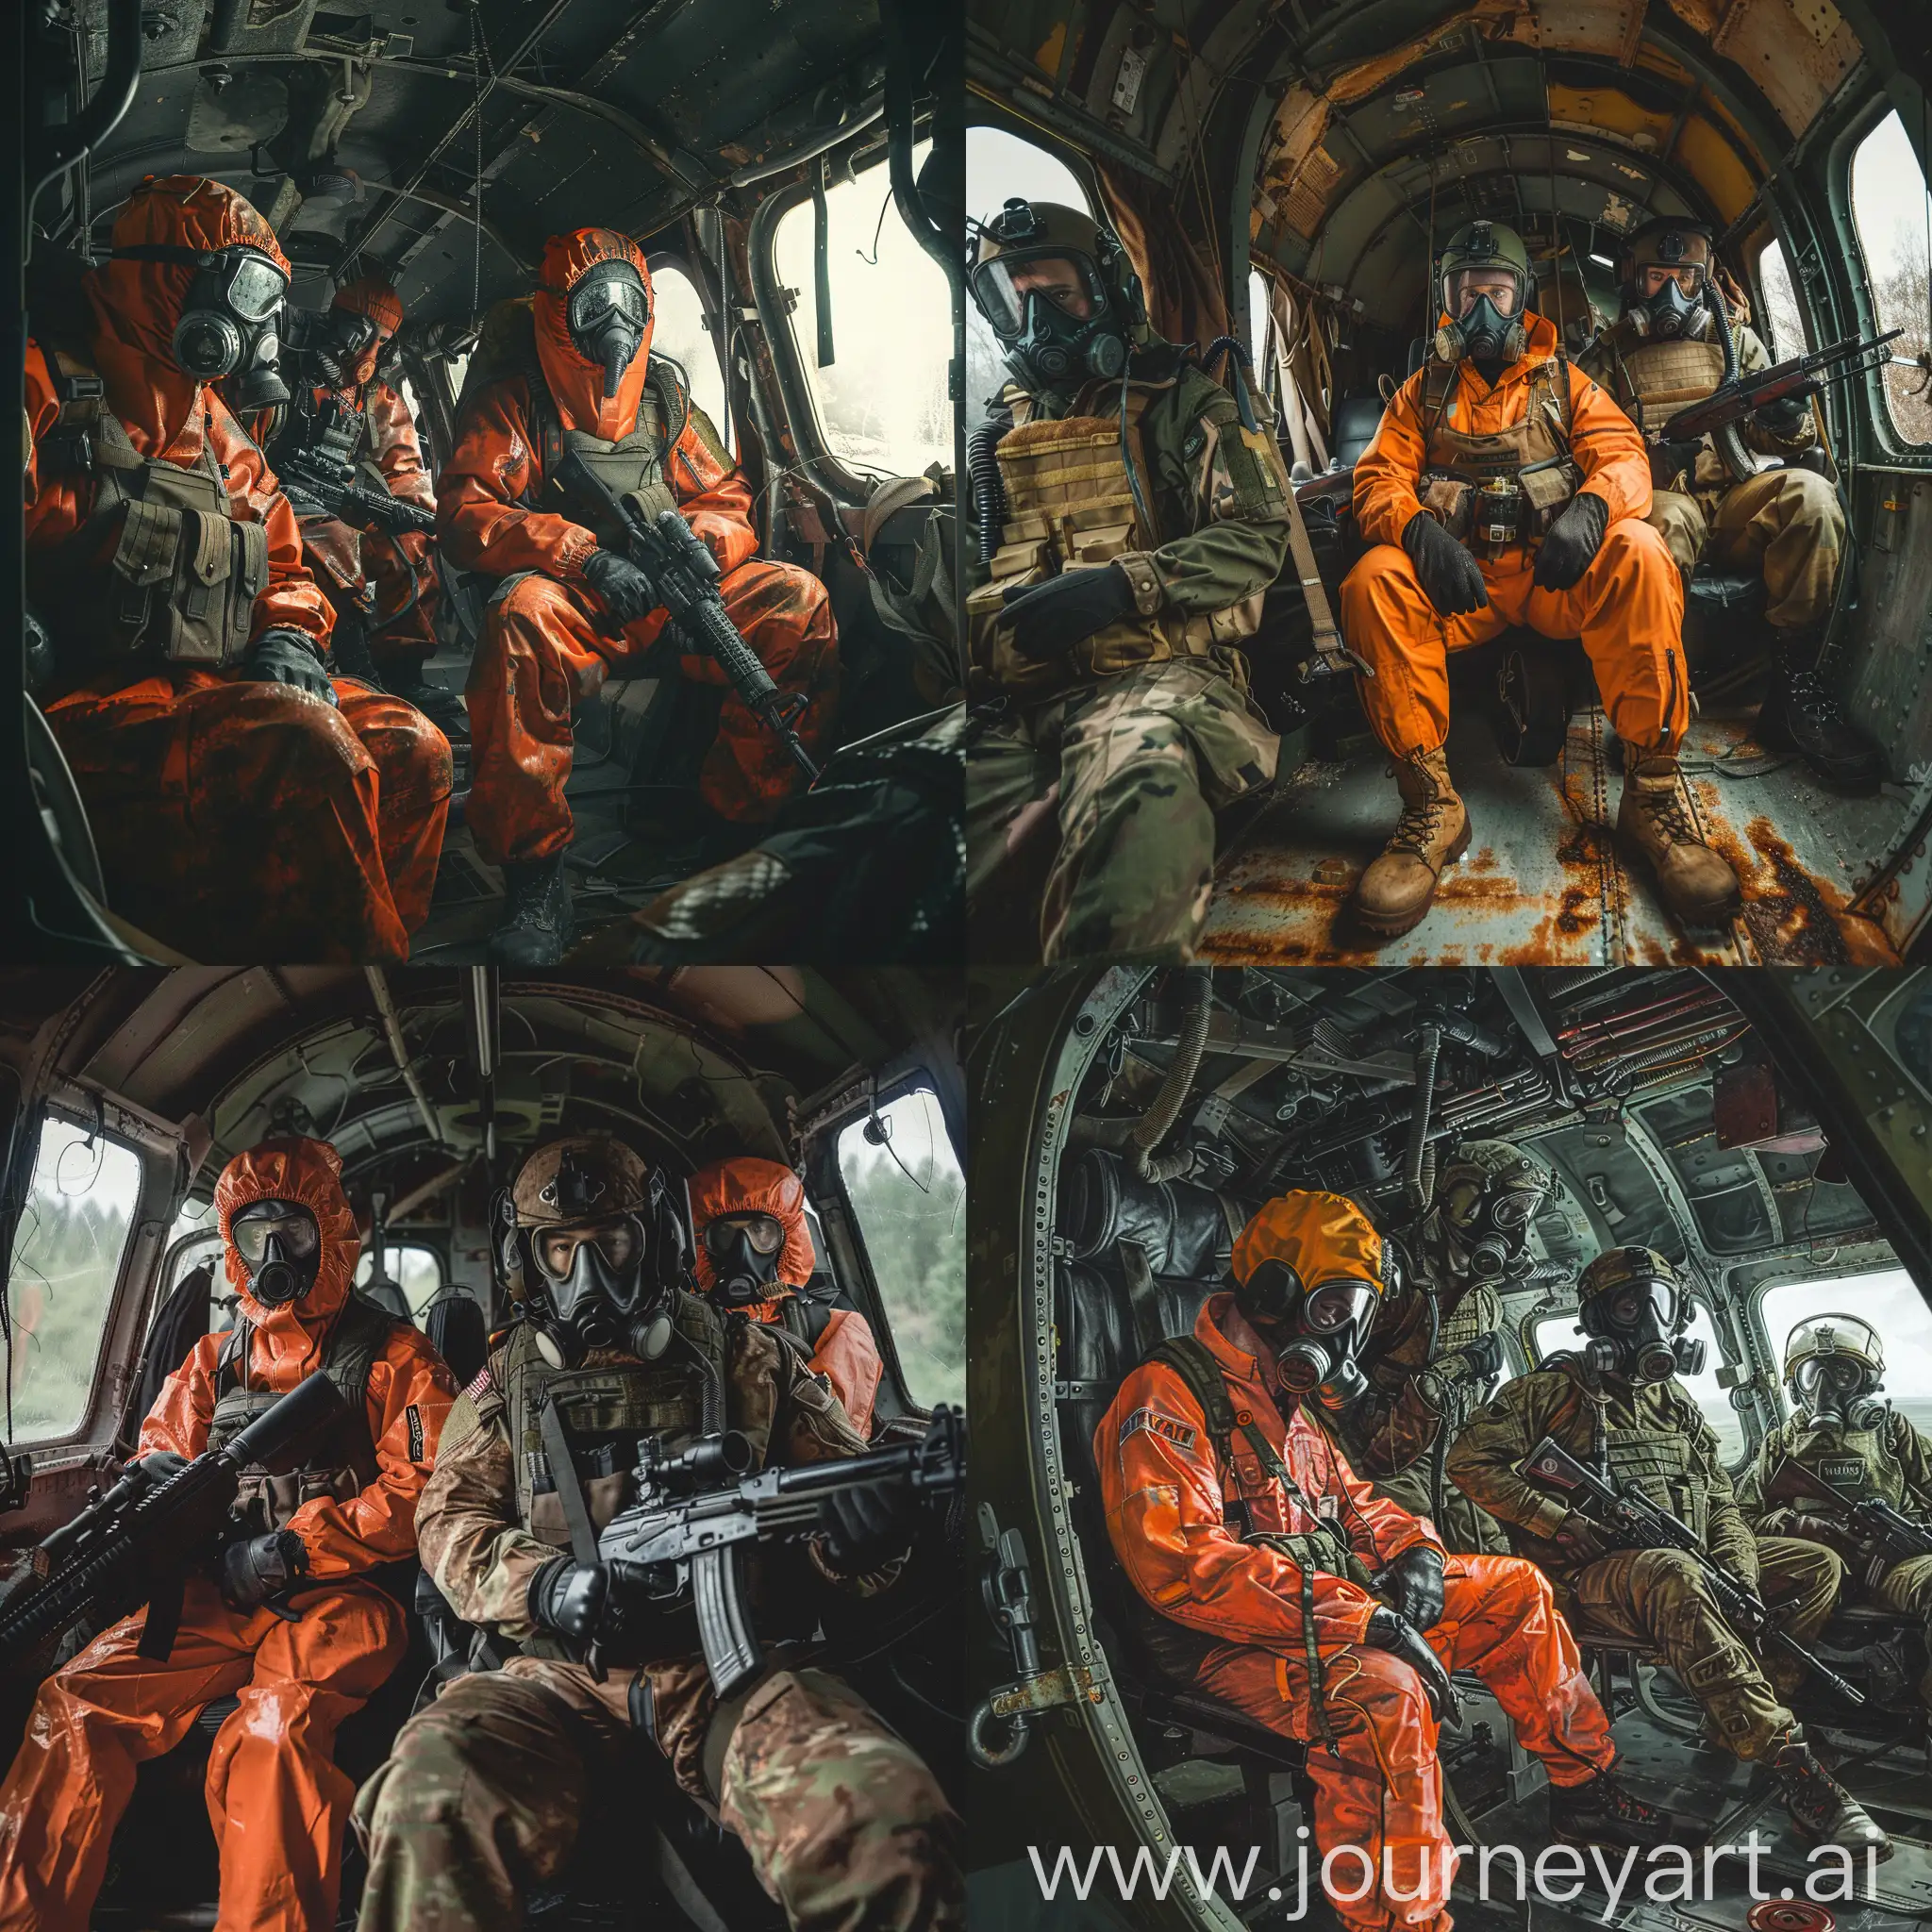 Chernobyl, exclusion zone, A scientist and two military men are sitting inside a military helicopter, a scientist in orange chemical protection with gasmask, military men are dressed in military overalls with unloading, gasmasks, sniper rifle.